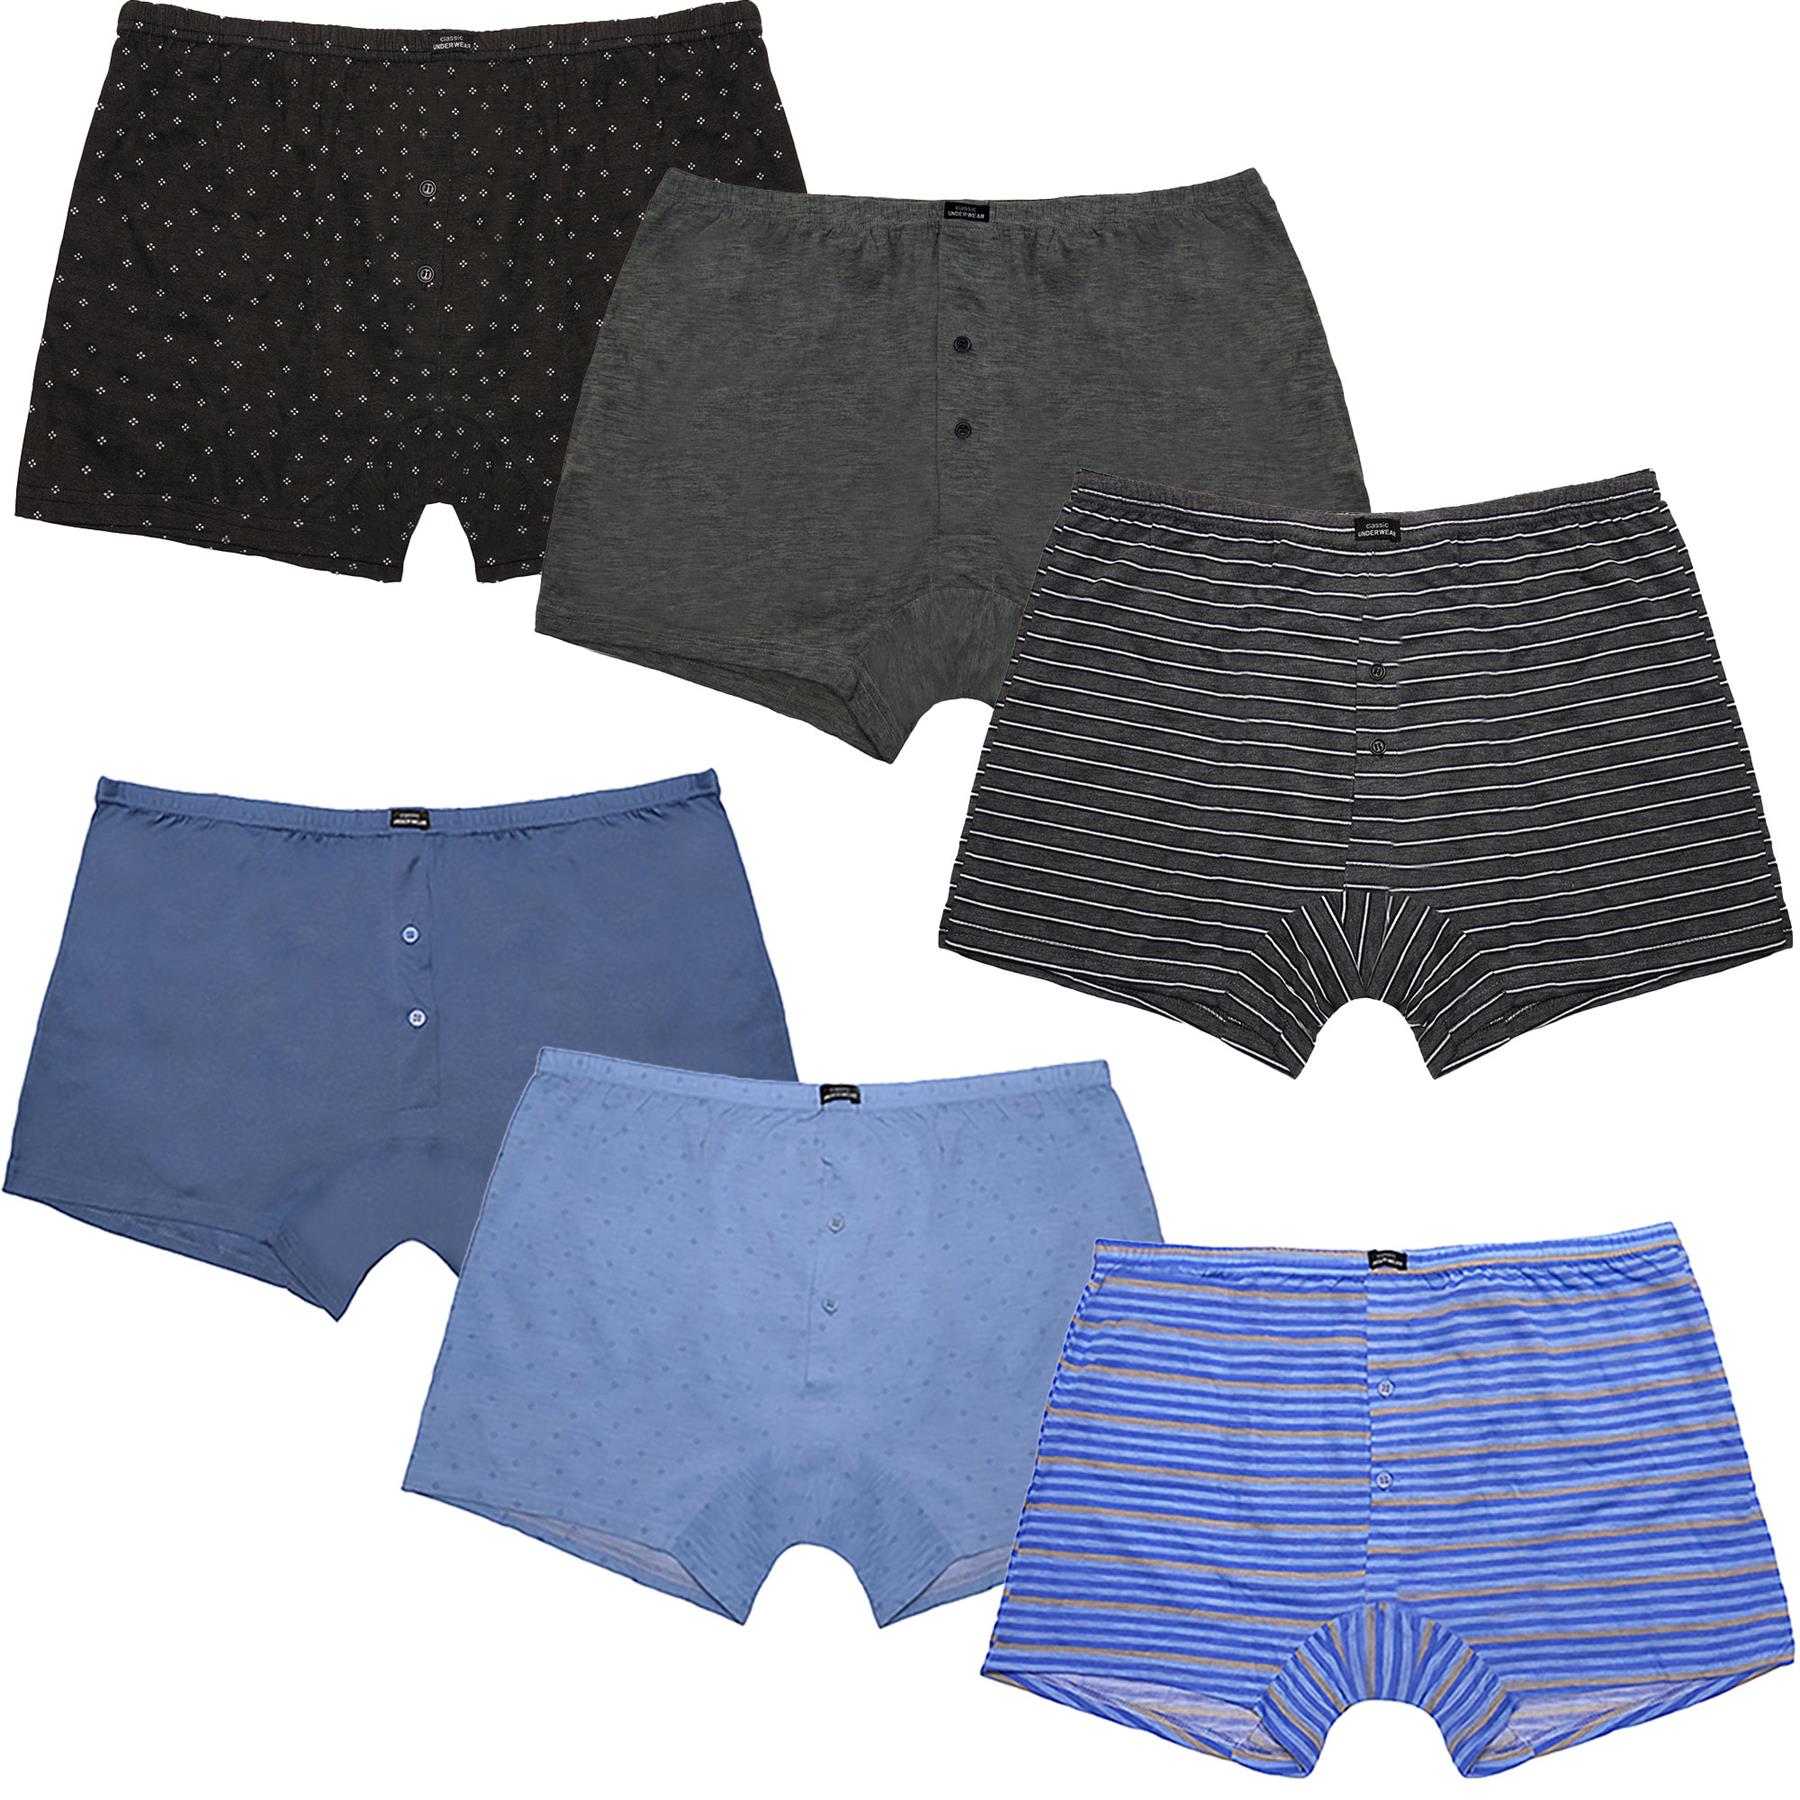 A2Z Mens Plain Trunks Underwear Pack Of 3 Comfortable Fit Lightweight Knickers